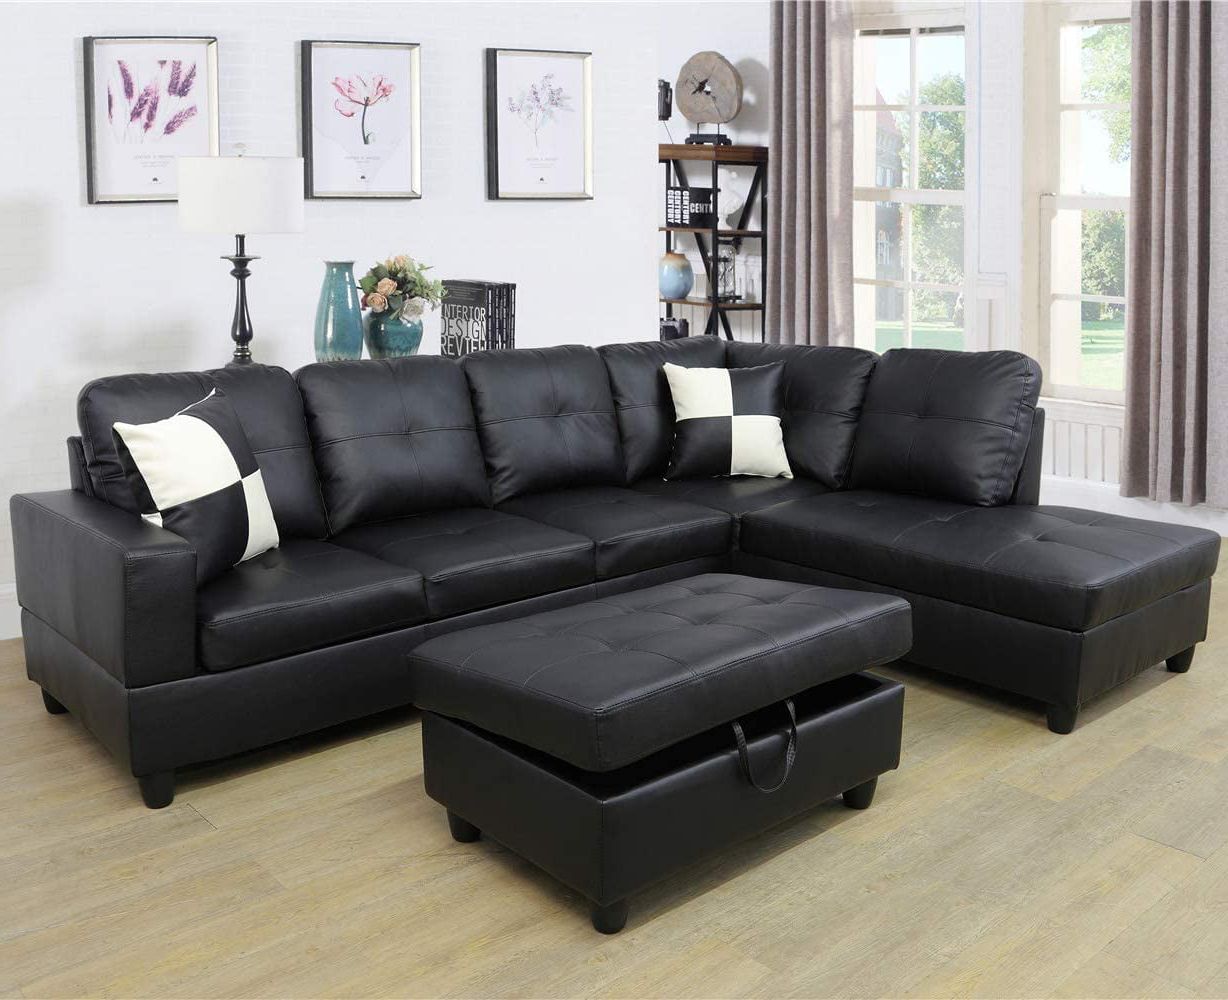 Widely Used Faux Leather Sectional Sofa Sets With Ainehome Faux Leather Sectional Set, Living Room L Shaped Modern Sofa (View 10 of 15)